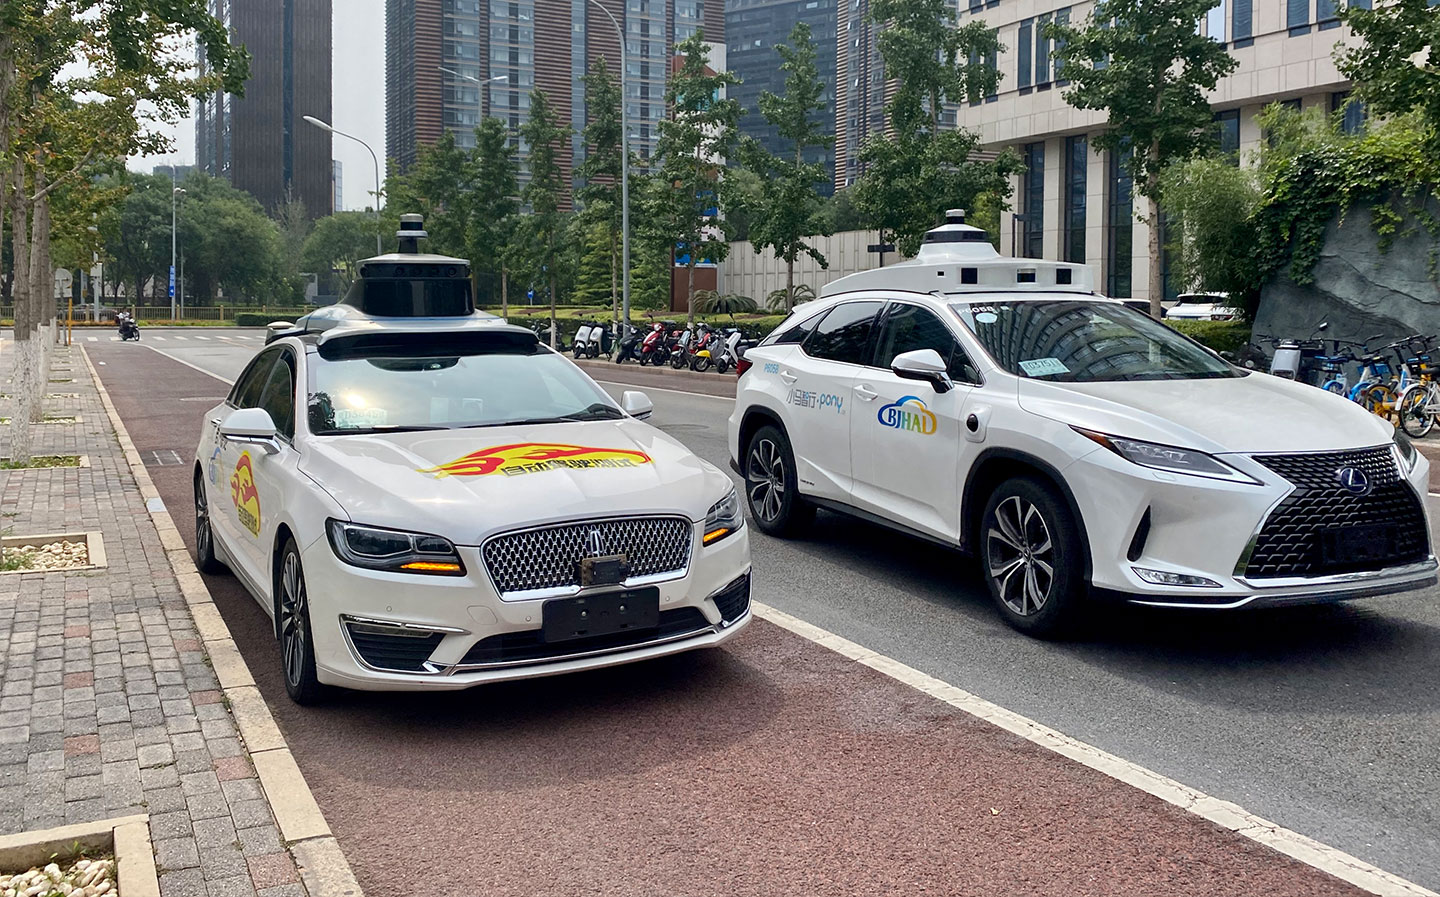 What are the different levels of self-driving vehicle?